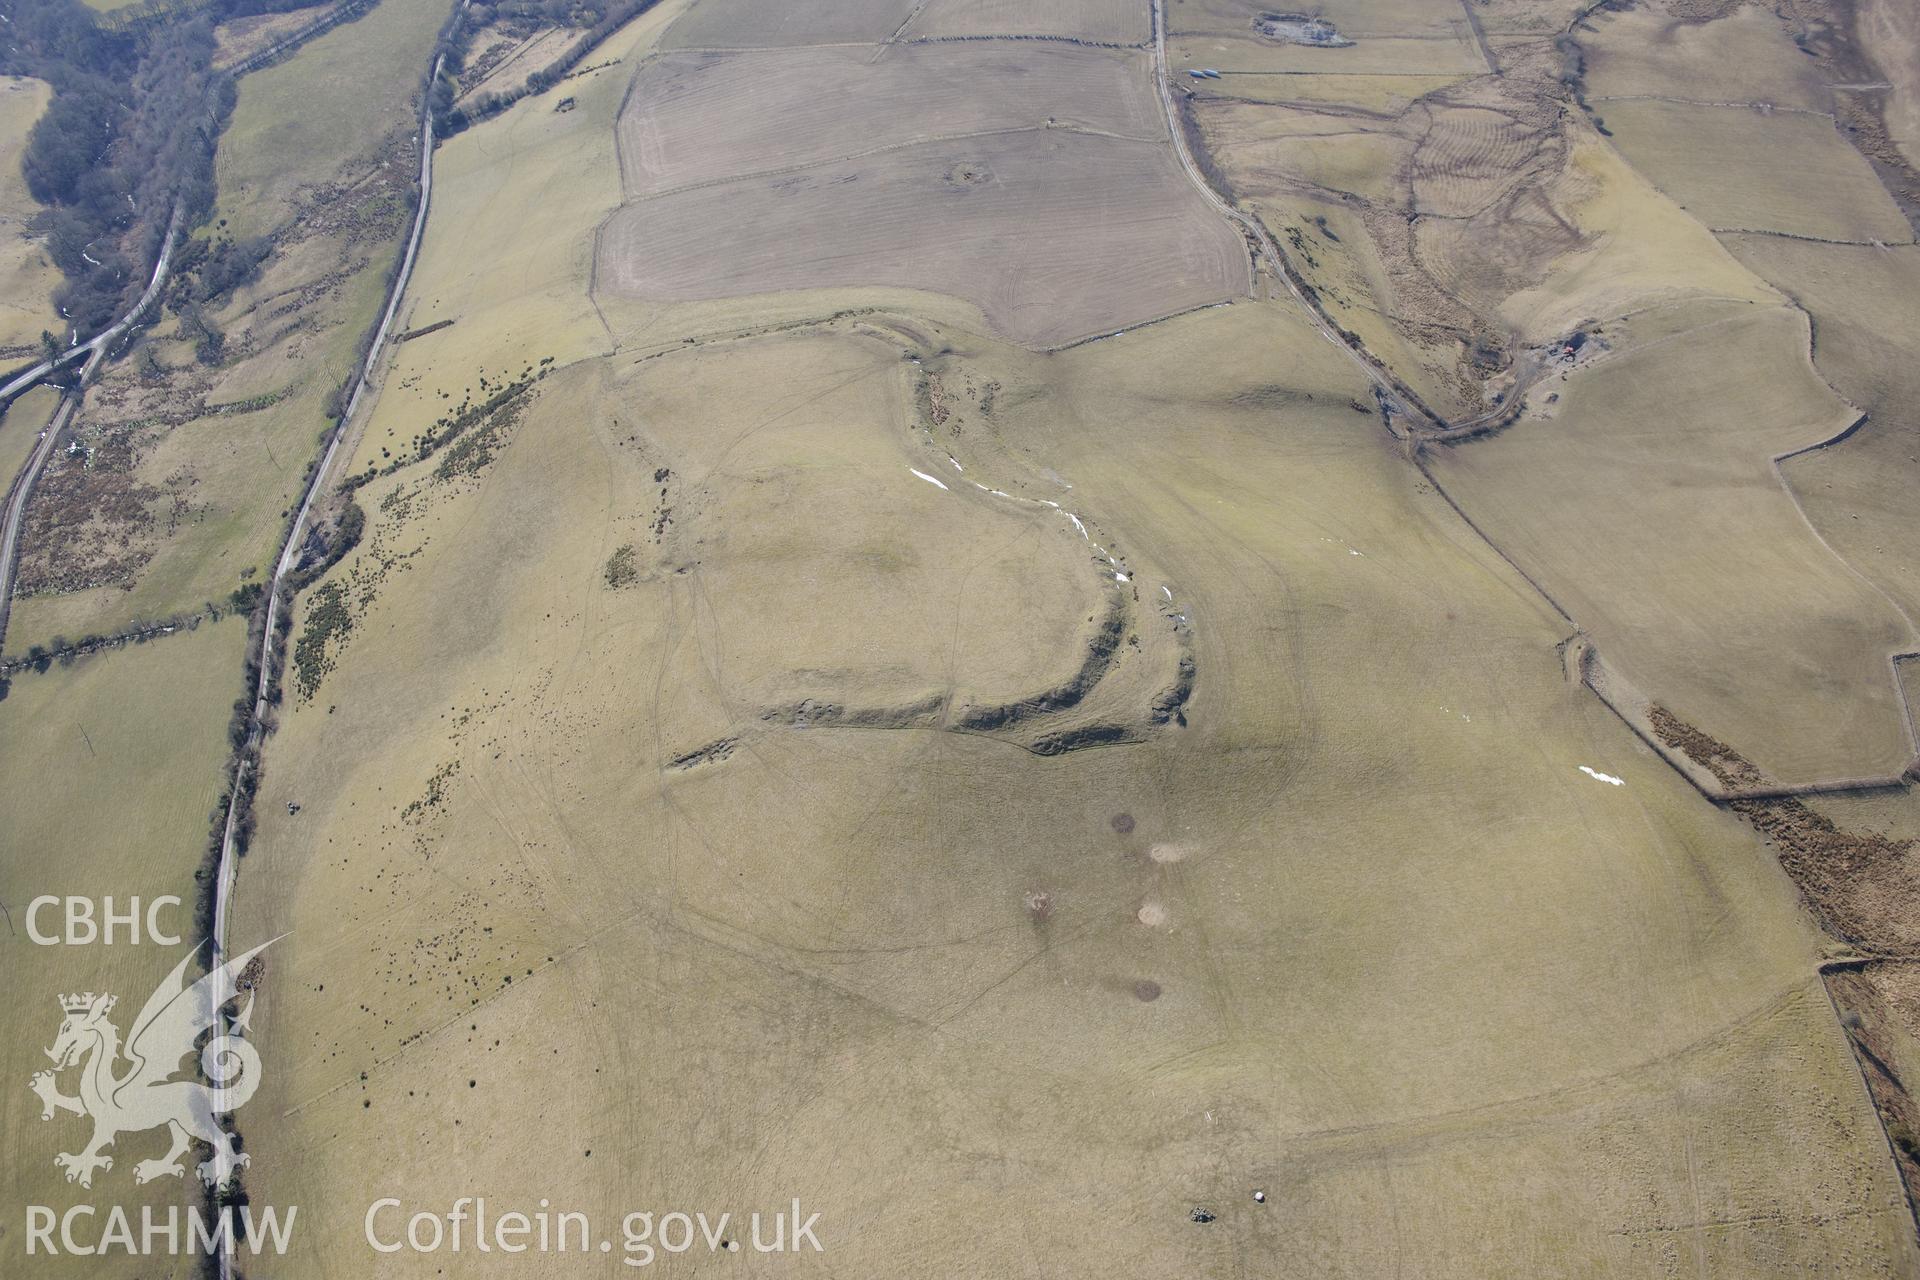 Quarts boulder at Gaer Fawr hillfort, north of Lledrod, Aberystwyth. Oblique aerial photograph taken during the Royal Commission?s programme of archaeological aerial reconnaissance by Toby Driver on 2nd April 2013.